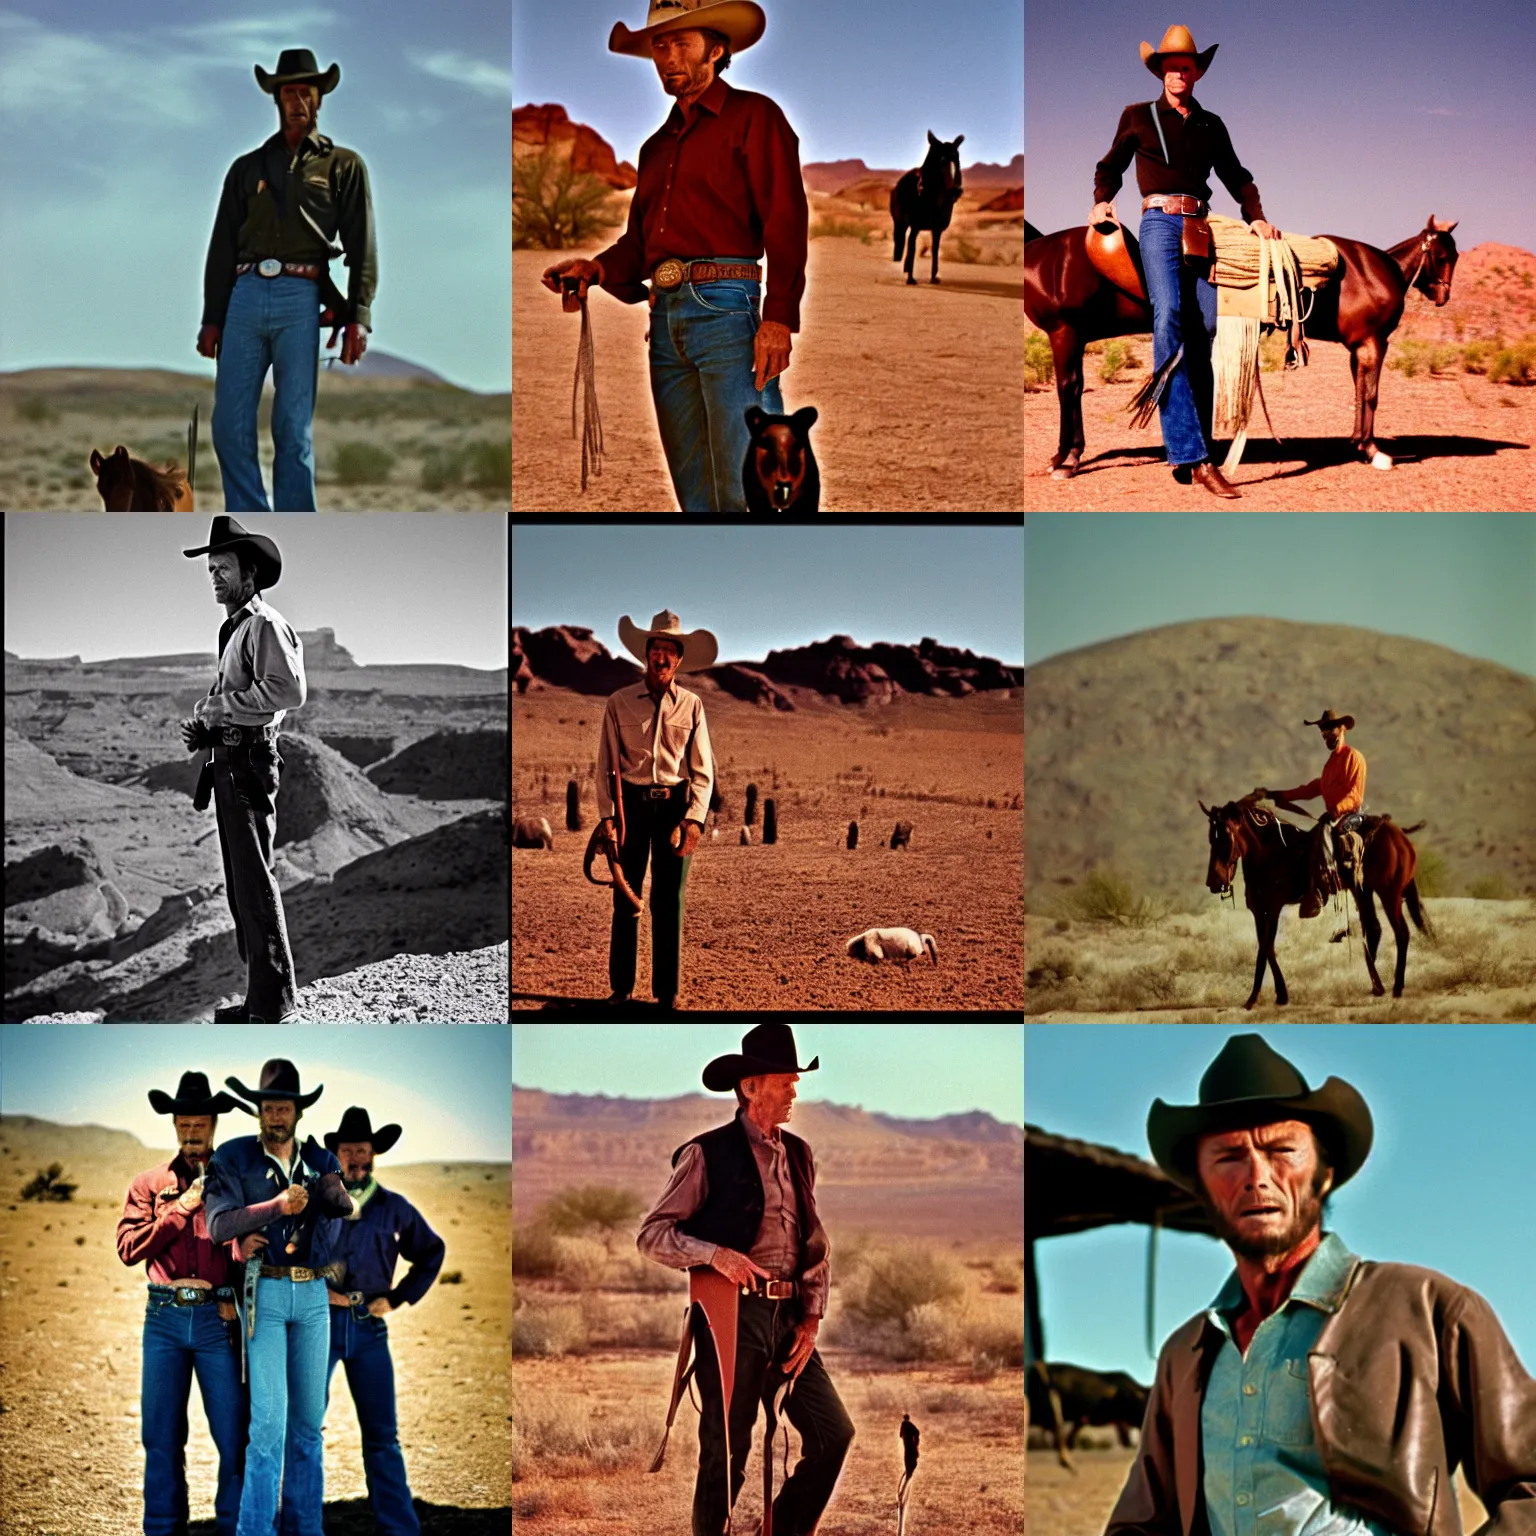 Prompt: point of view shot in color from 1 9 6 9 of clint eastwood as a cowboy, standing with hands on colts. desert in the background. cinematic, 5 0 mm lens